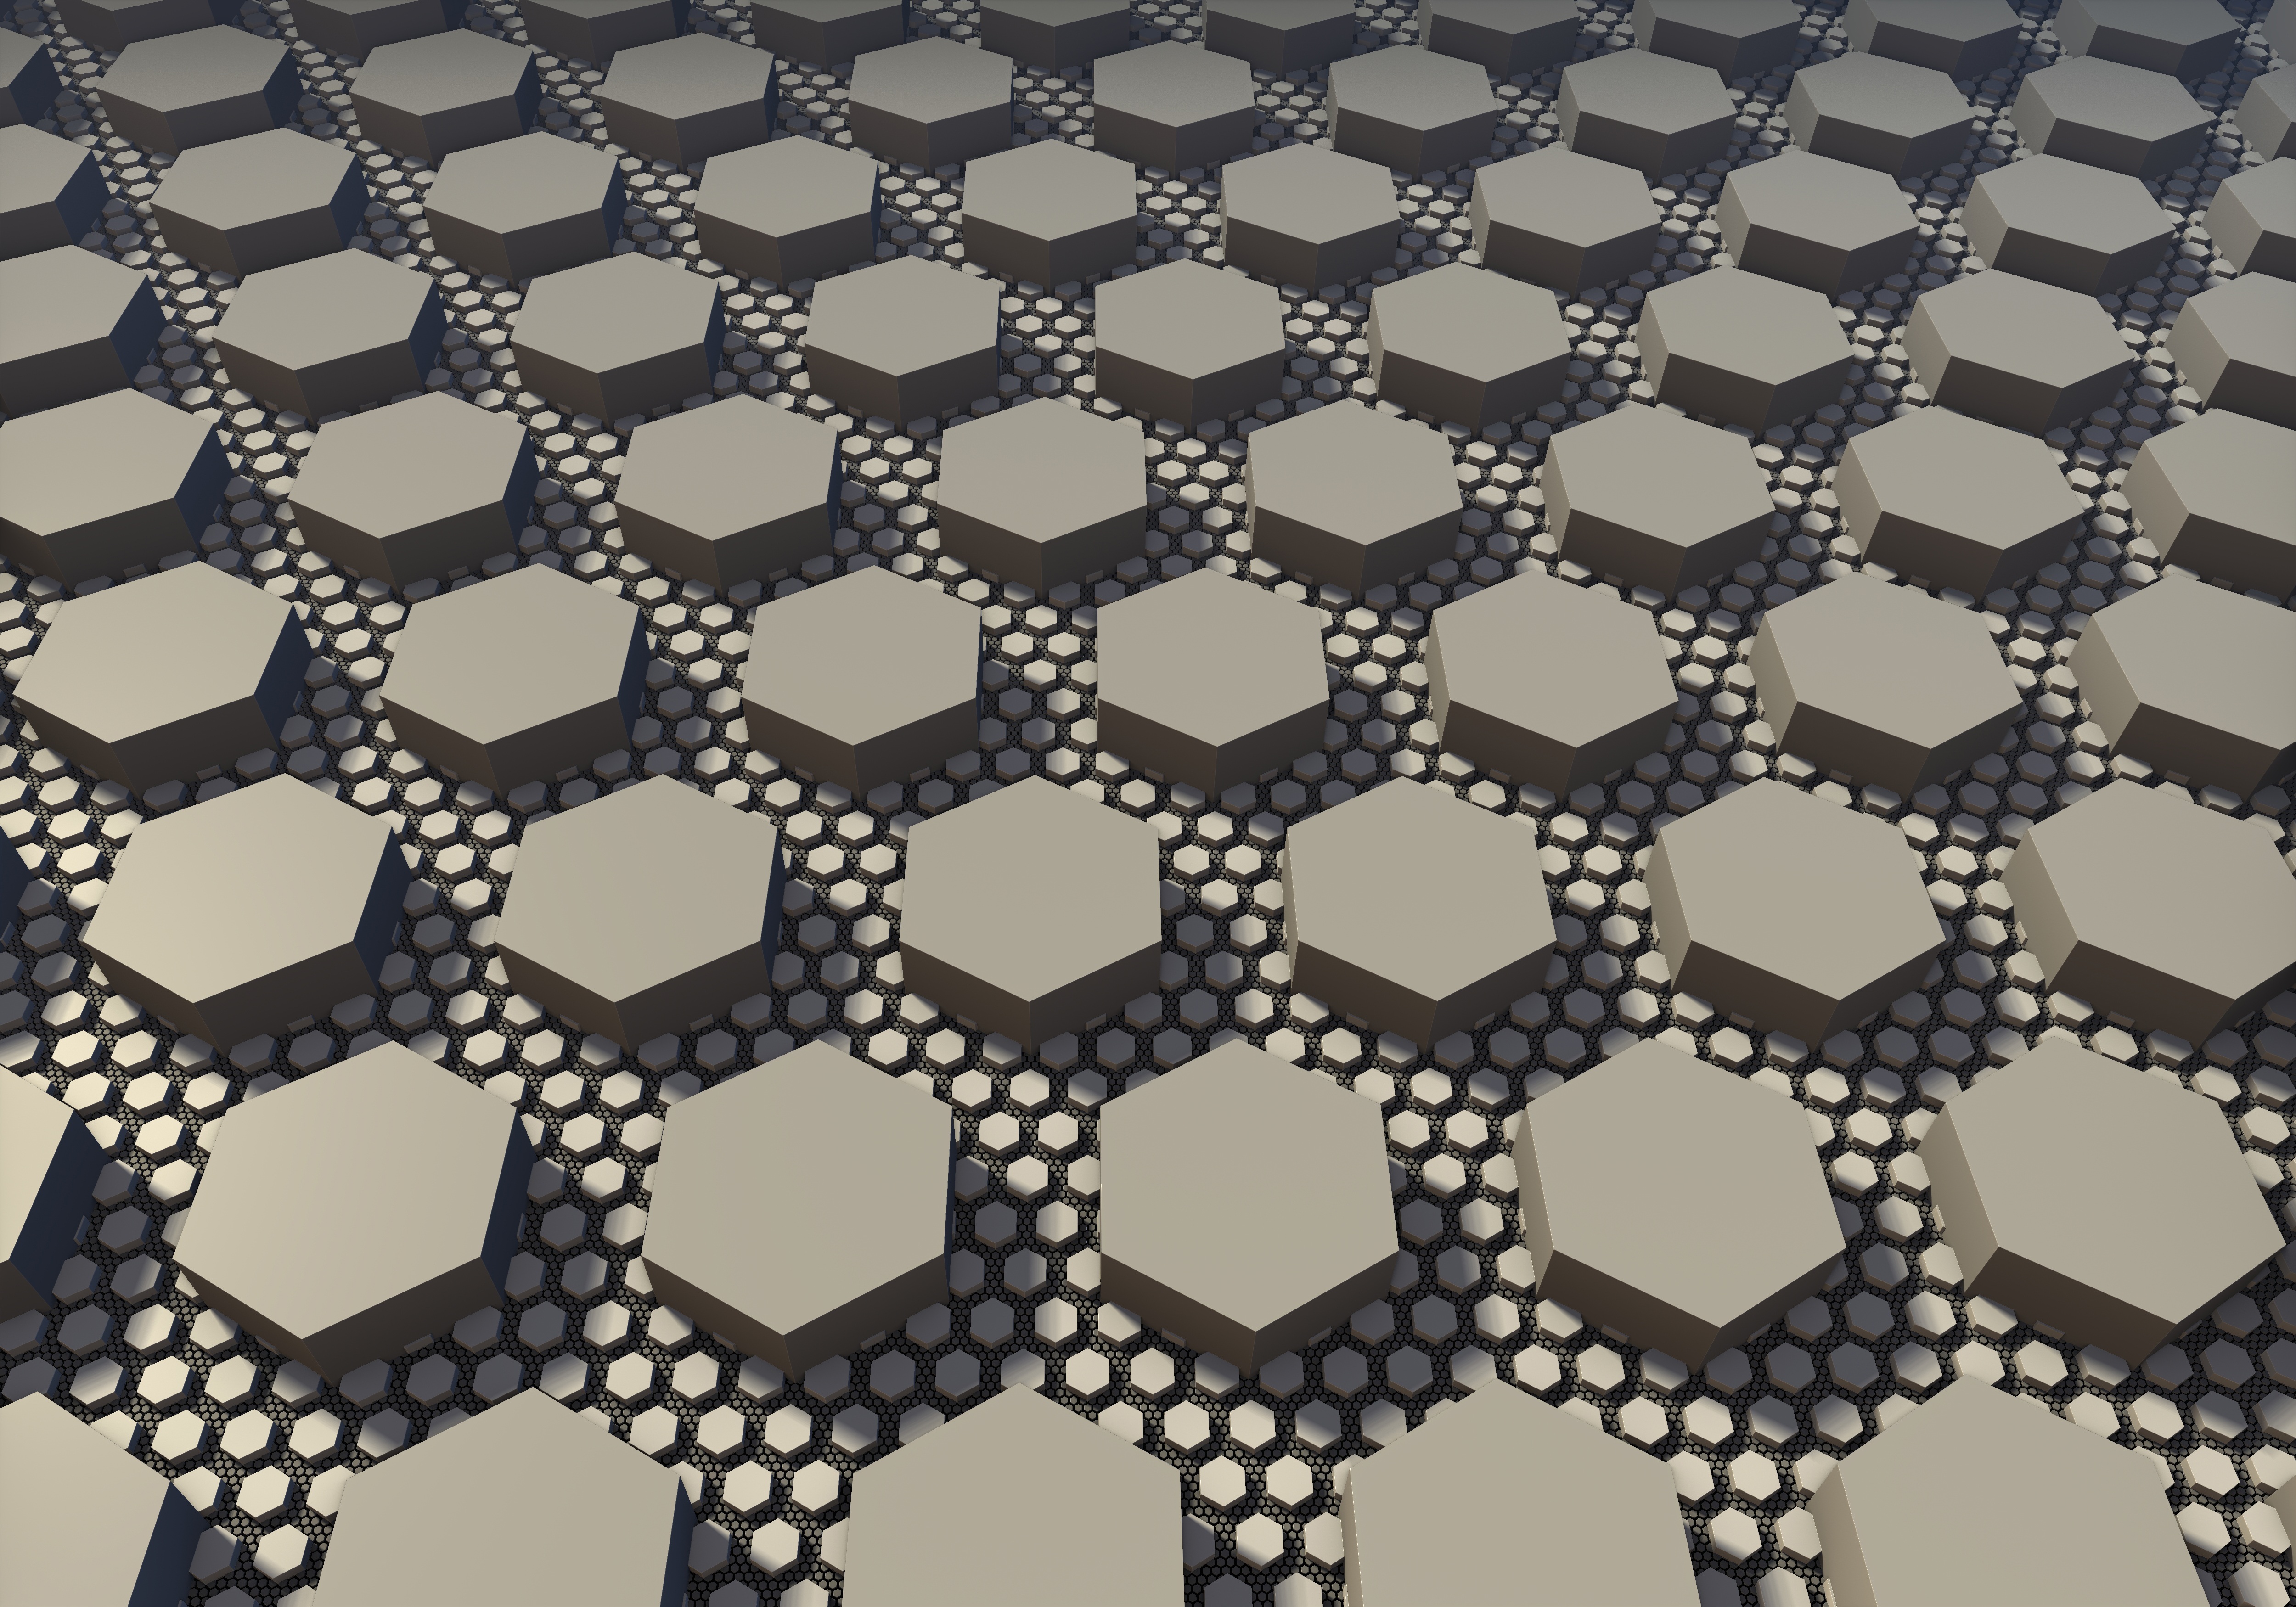 78949 download wallpaper 3d, apples, form, forms, hexagons, hexagonals, networks, mesh screensavers and pictures for free